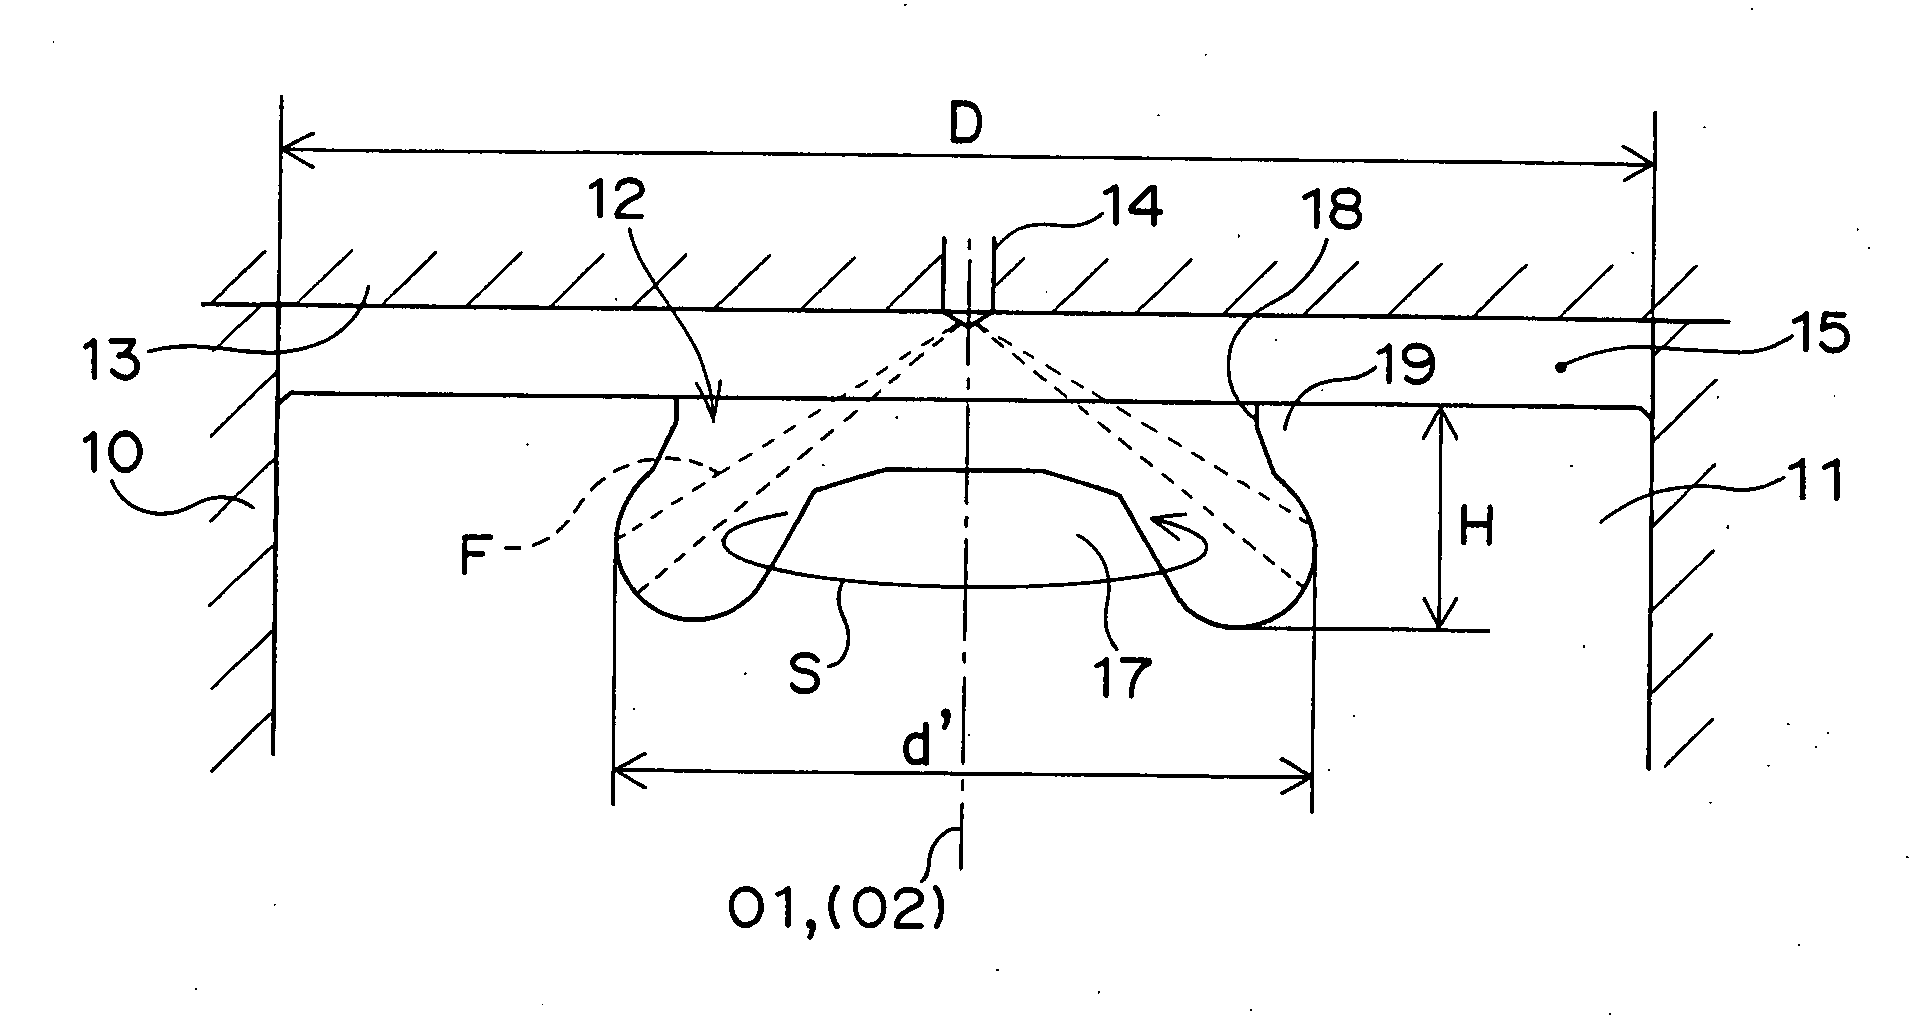 Shape Of Combustion Chamber For Direct-Injection Diesel Engine